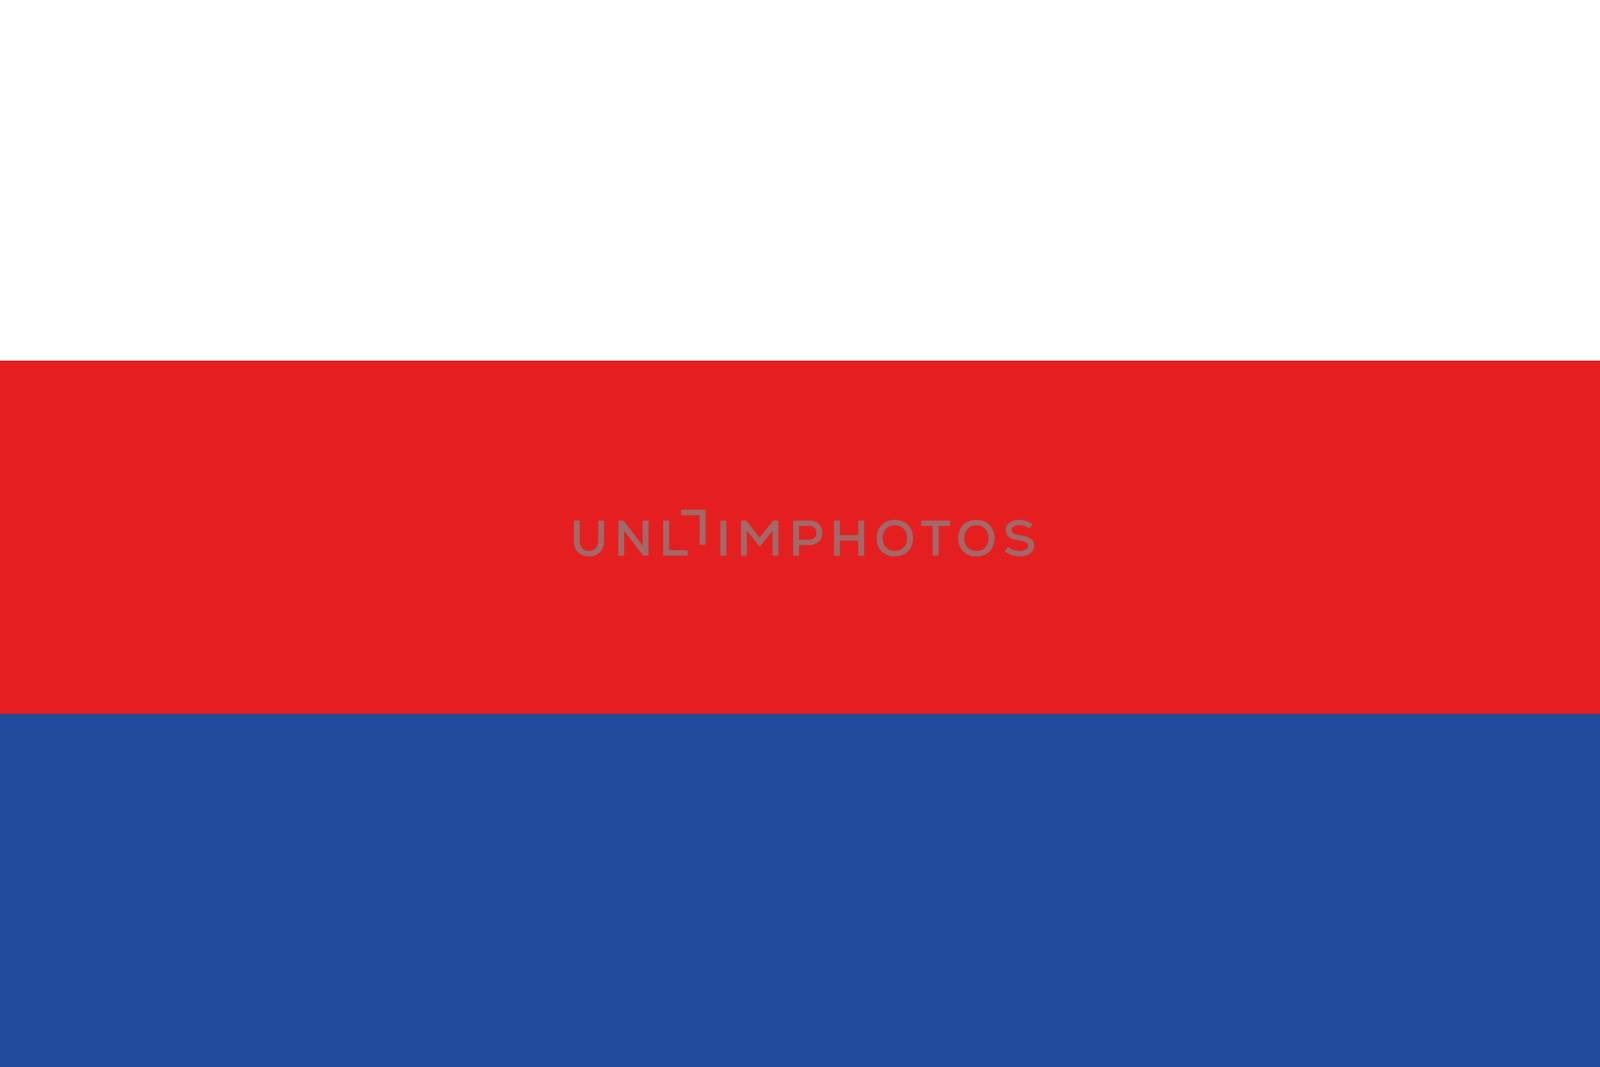 An illustration of the flag of Serbia